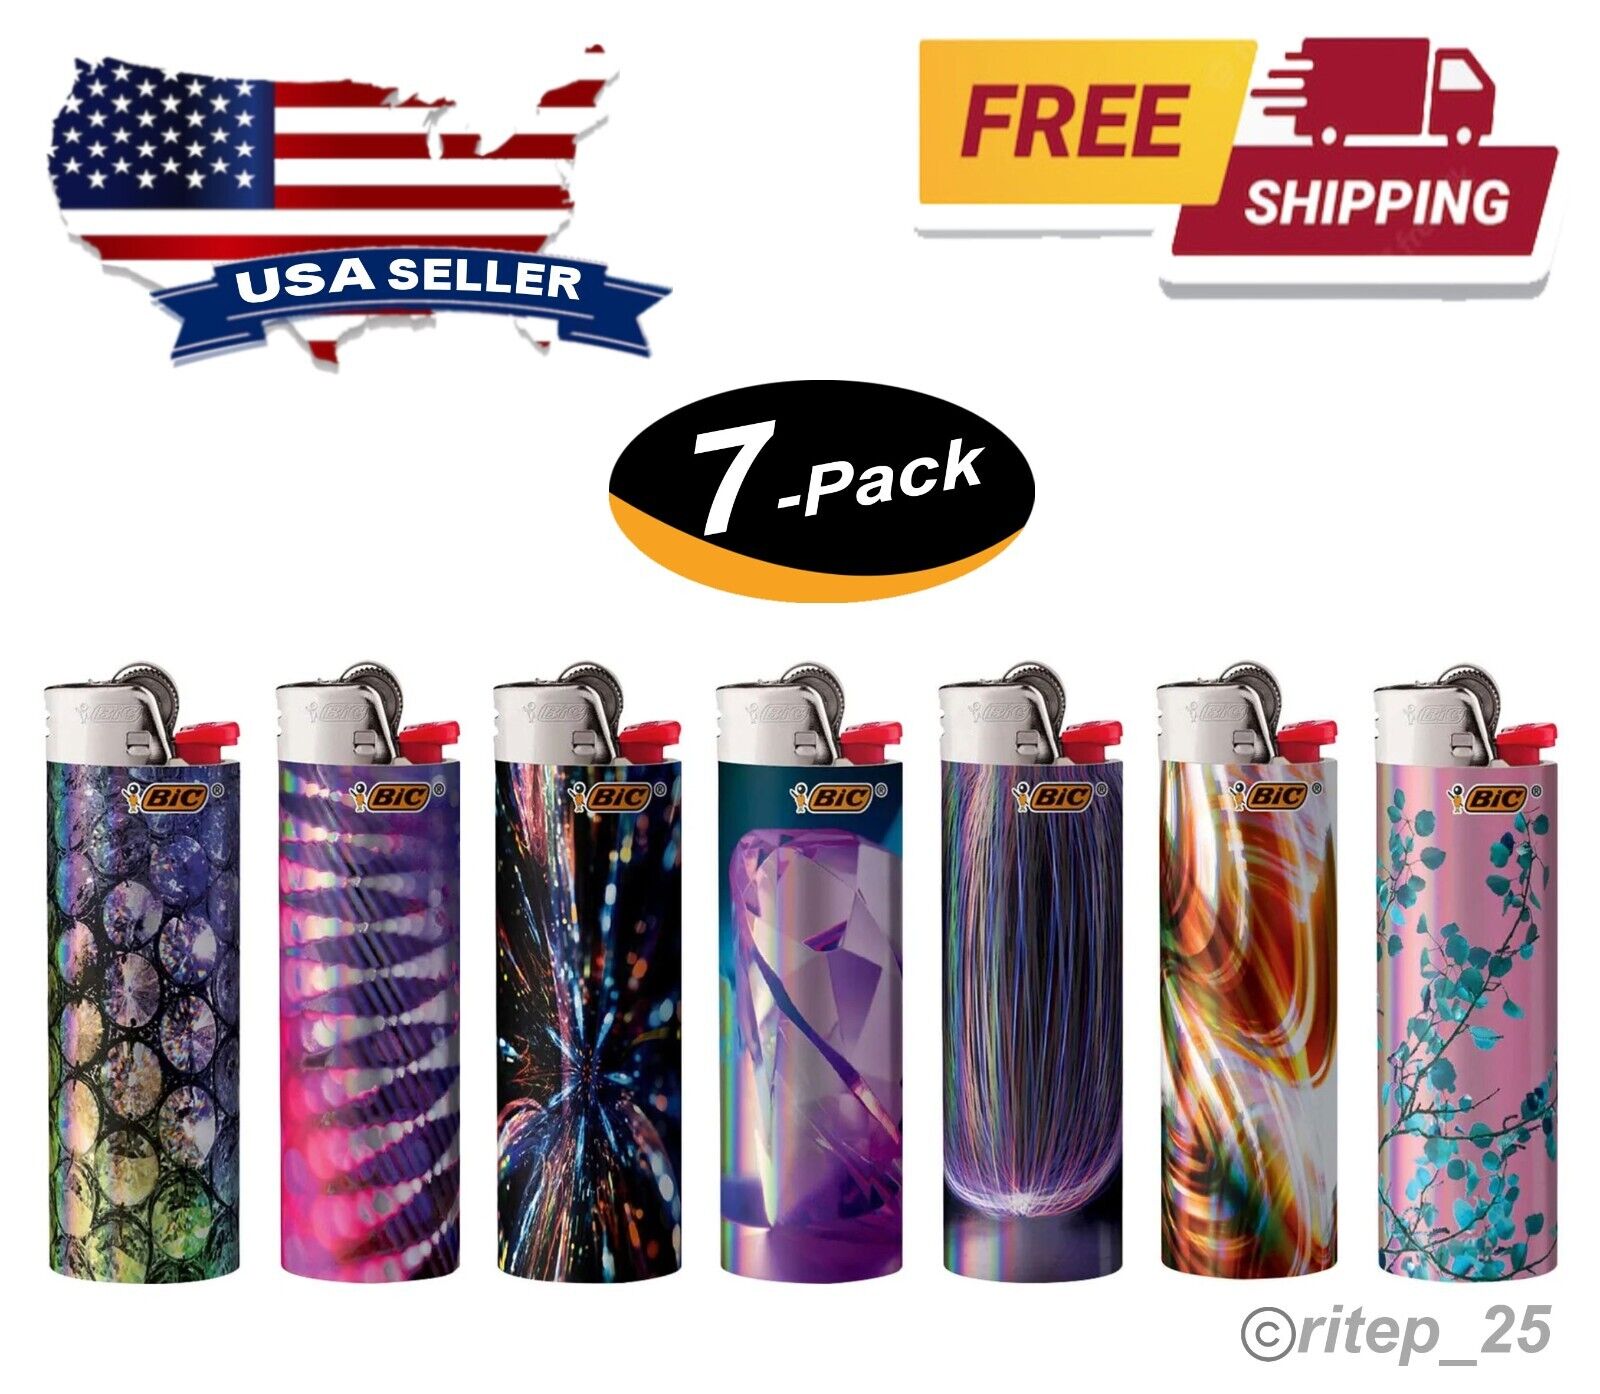 (7 Lighters) BIC Special Edition Night Out Series Cigarette Lighters - 